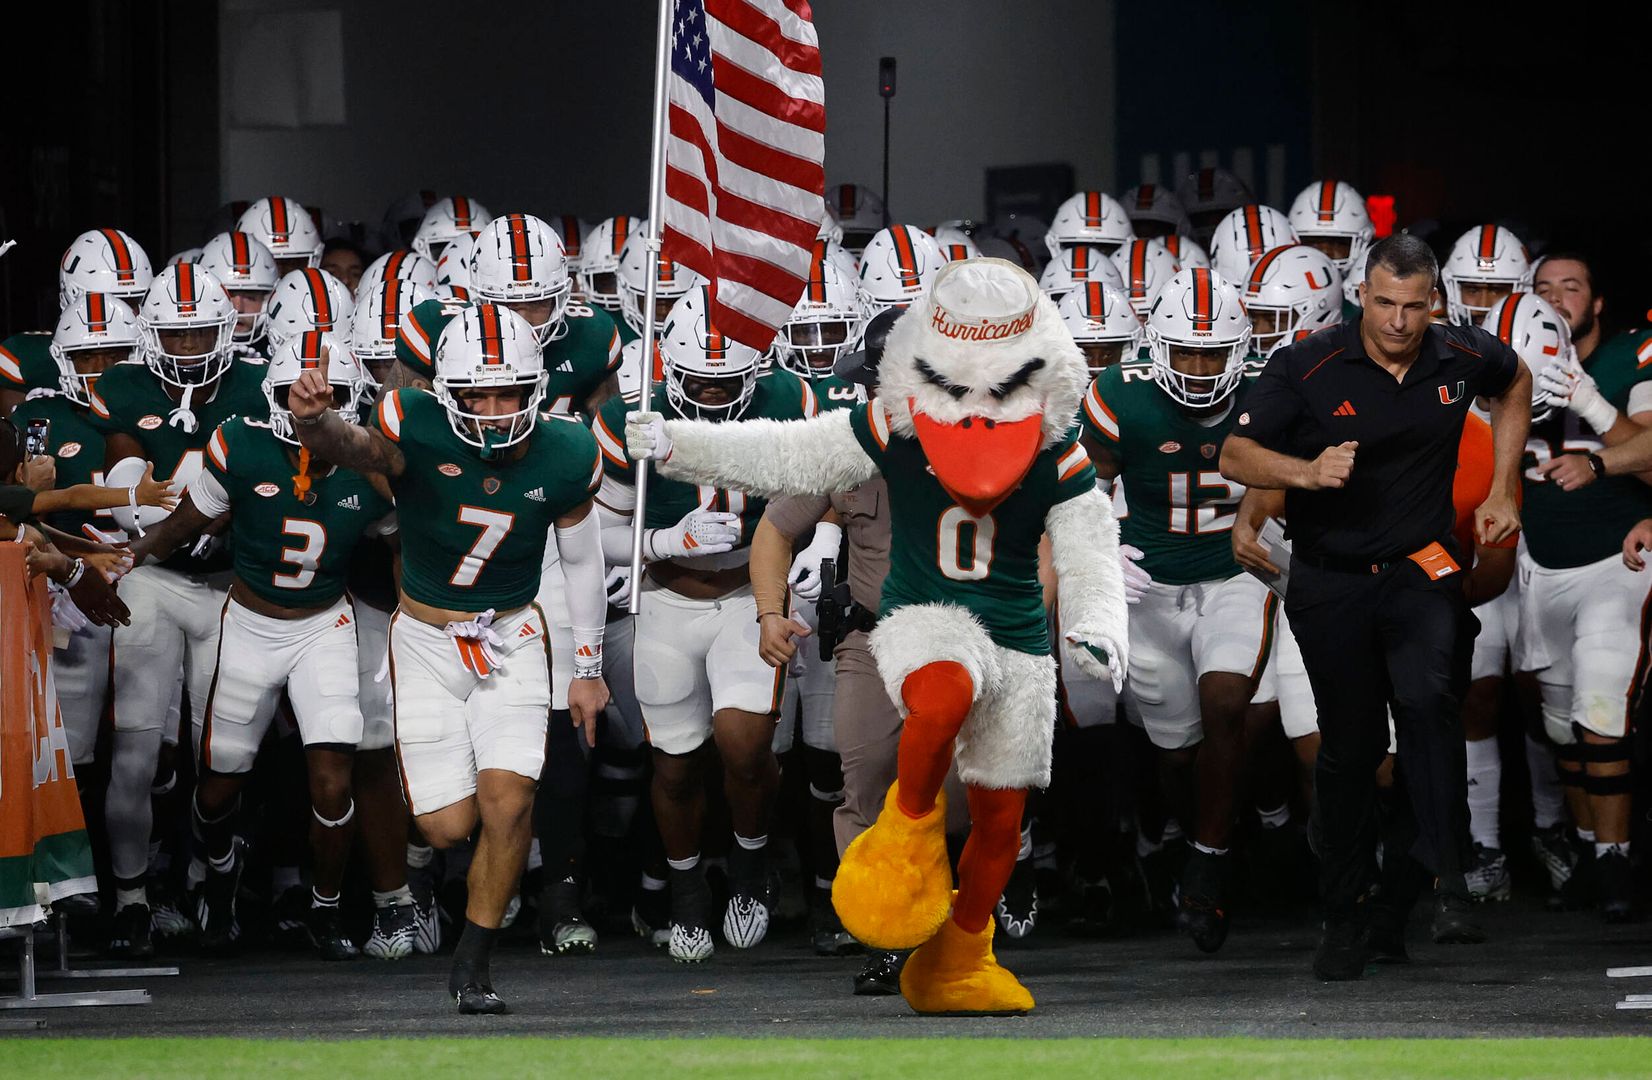 Canes, Cristobal Sign Another Top-Five Class